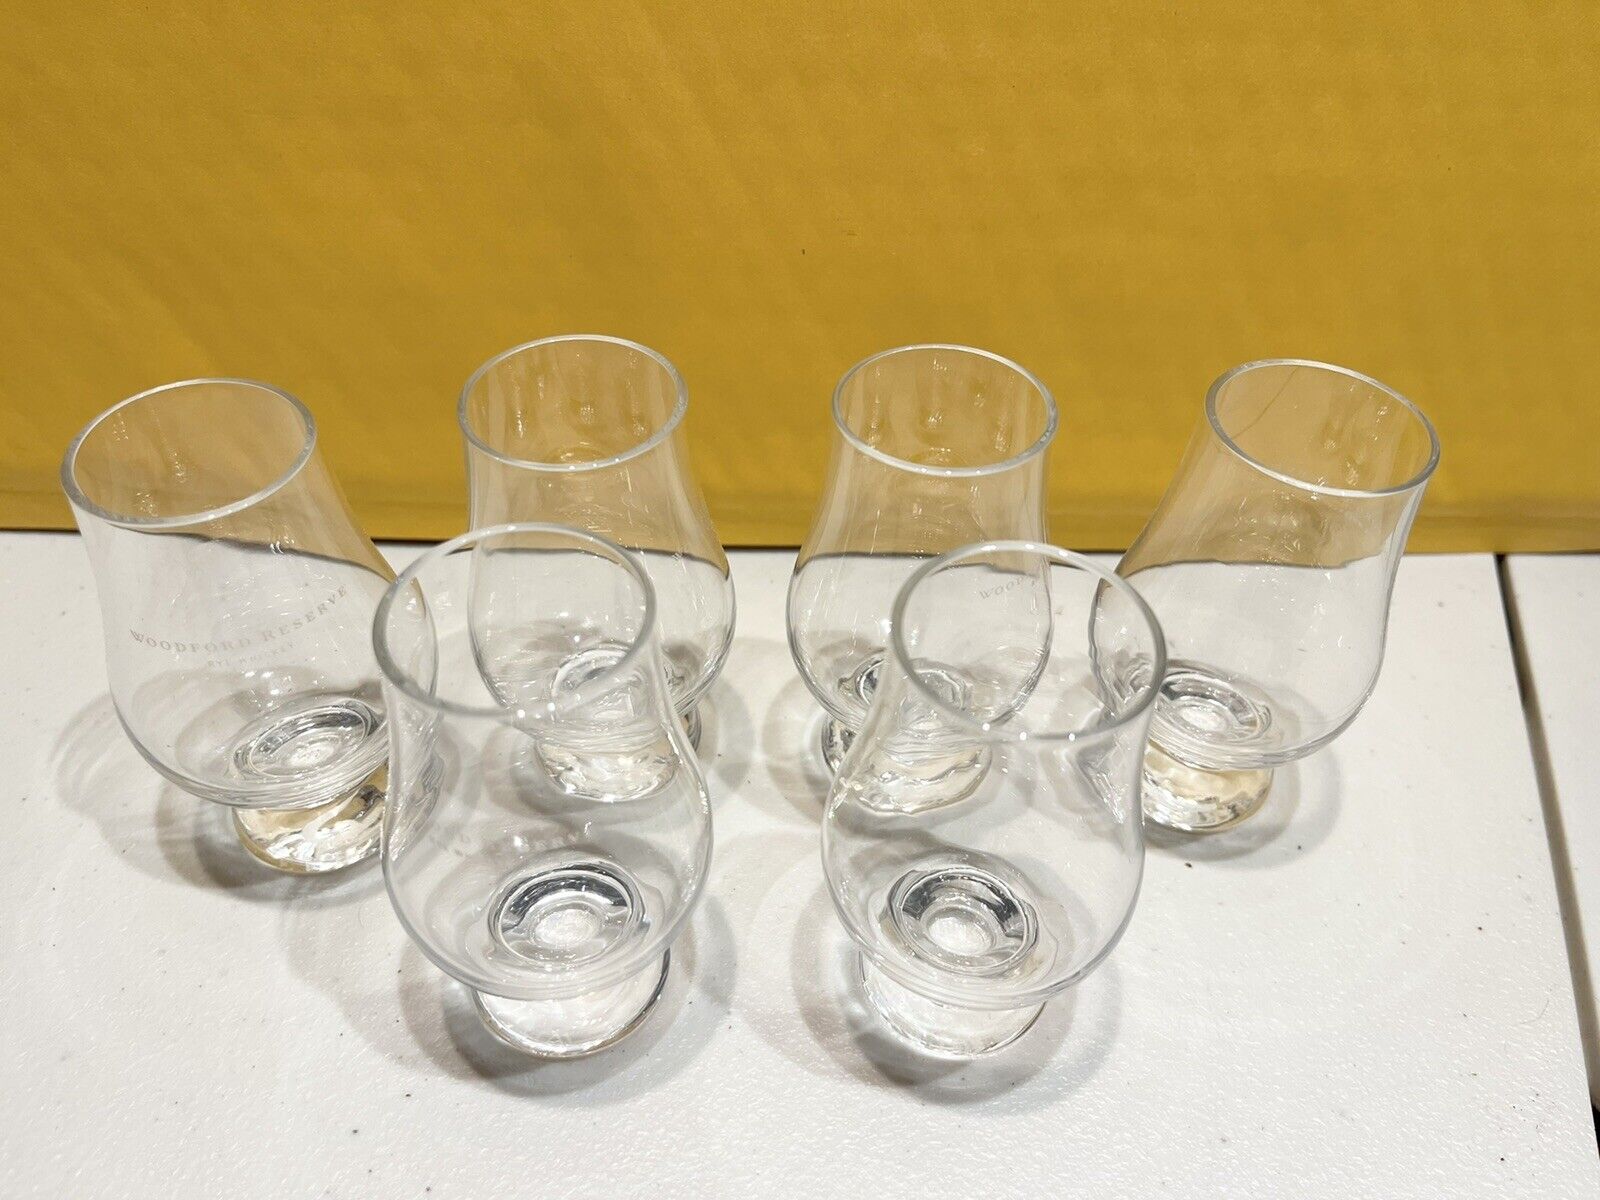 Woodford Reserve Whiskey Lot Of 6 Wee Glasses Shot Glasses Rye Mini Snifter New